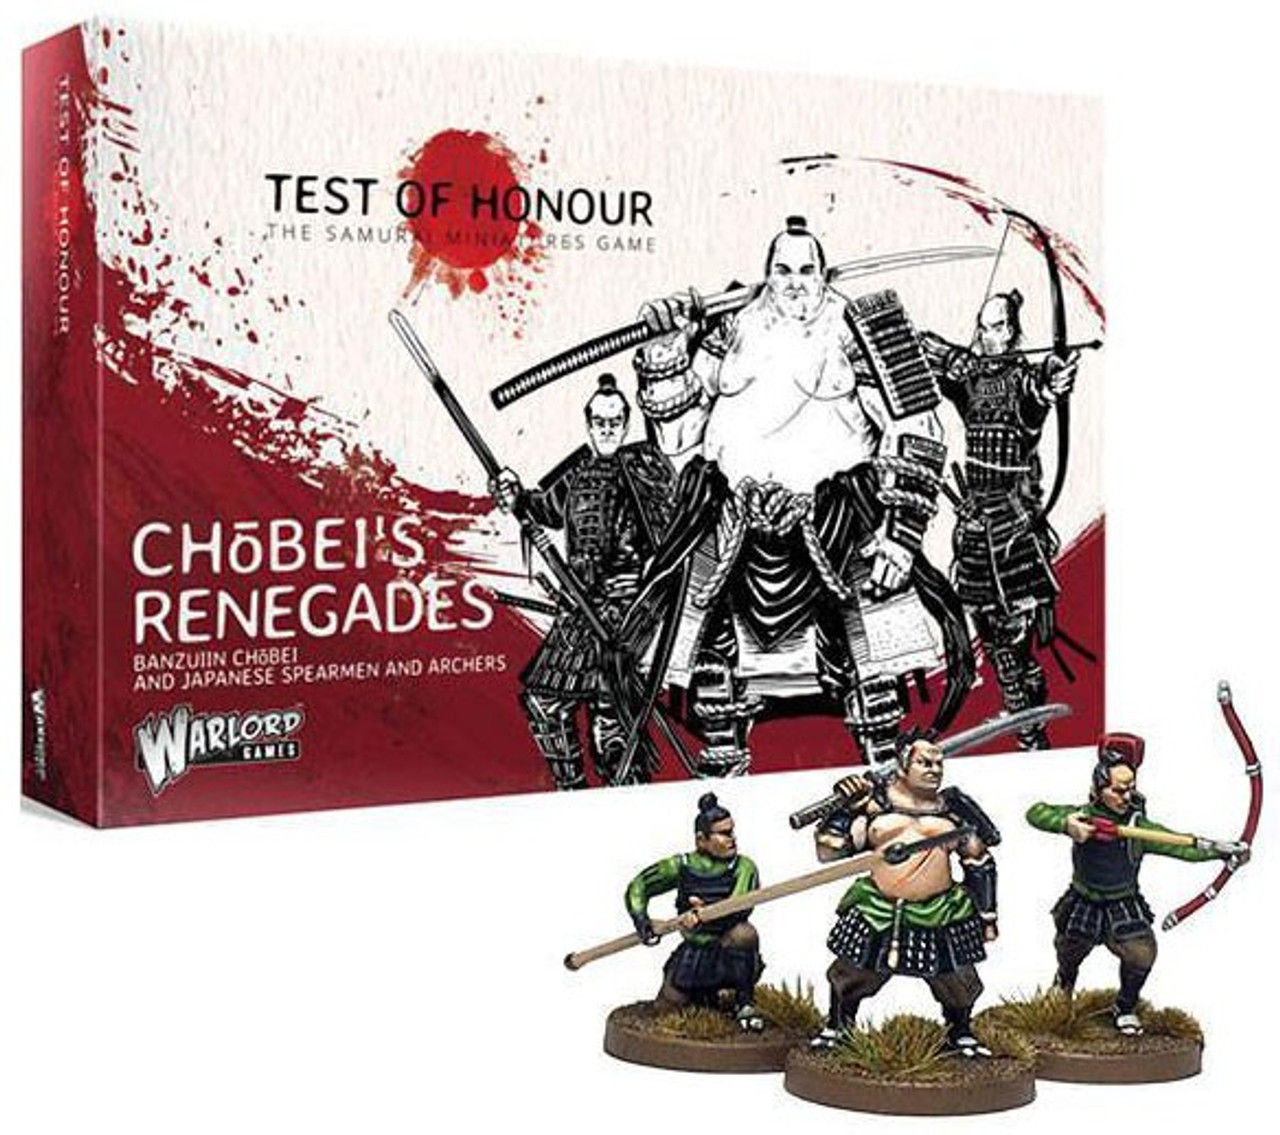 Test Of Honour Chobeis Renegades Miniatures Warlord Games Toywiz